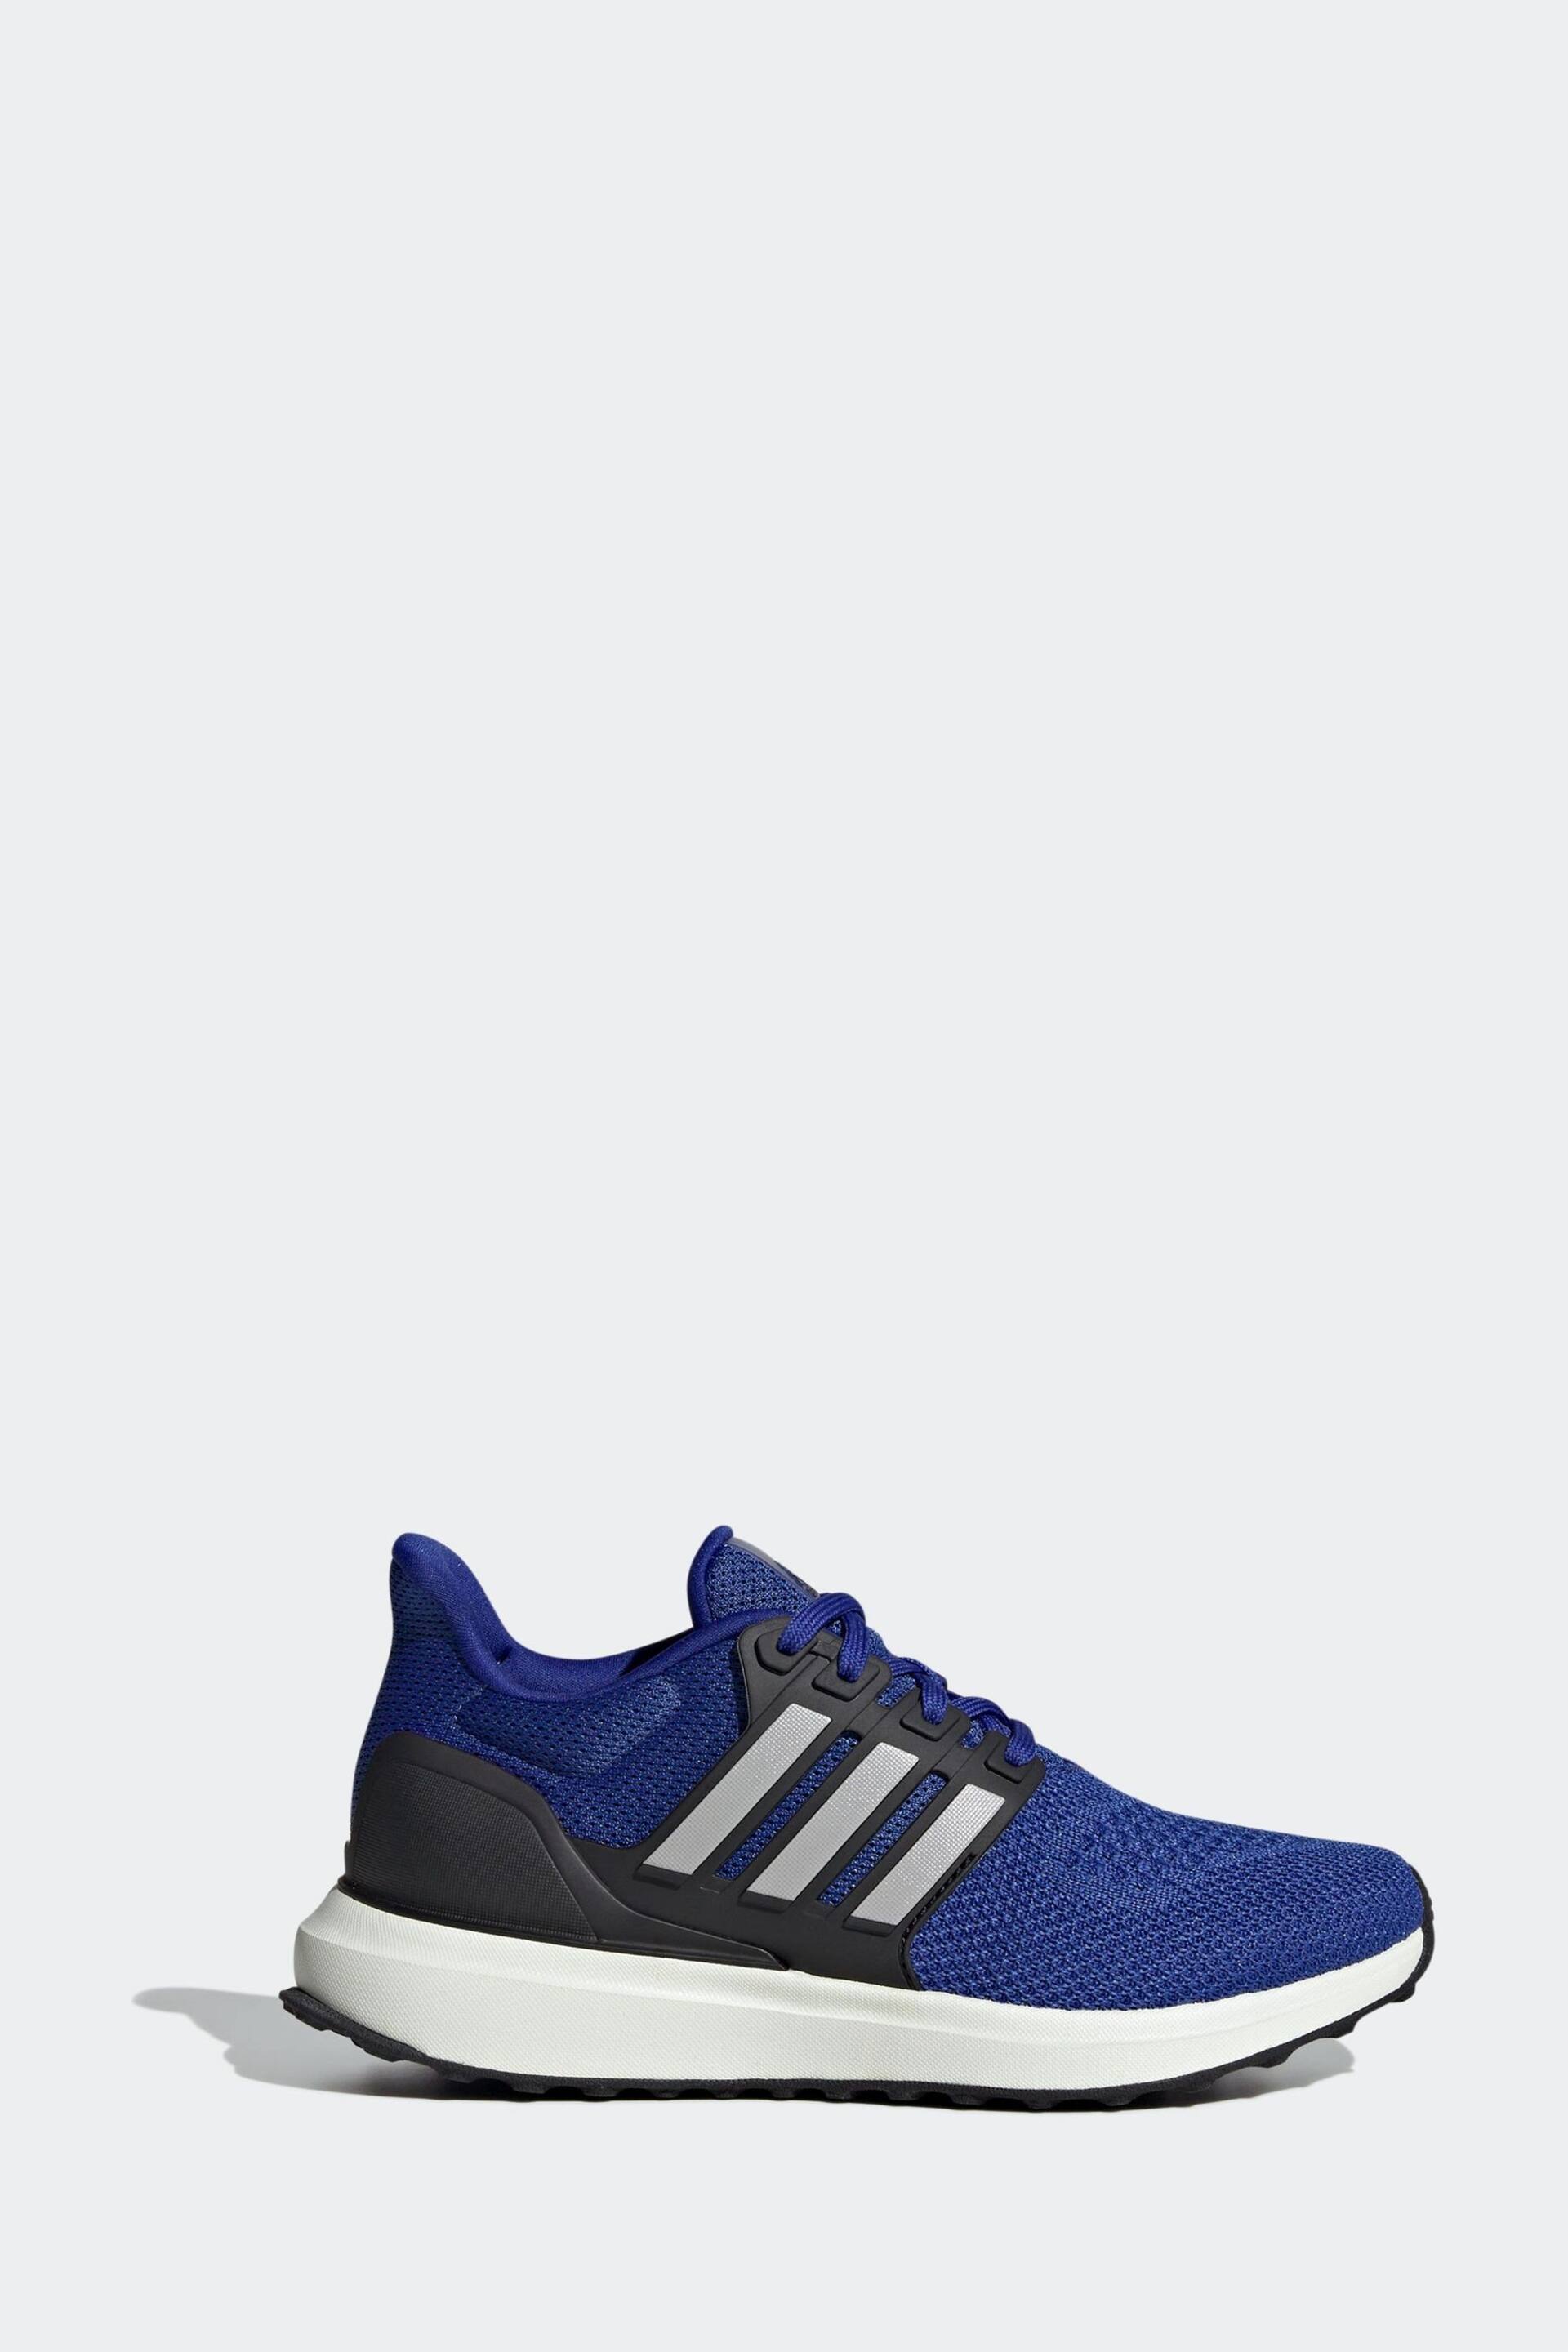 adidas Blue Sportswear Ubounce Dna Trainers - Image 1 of 9